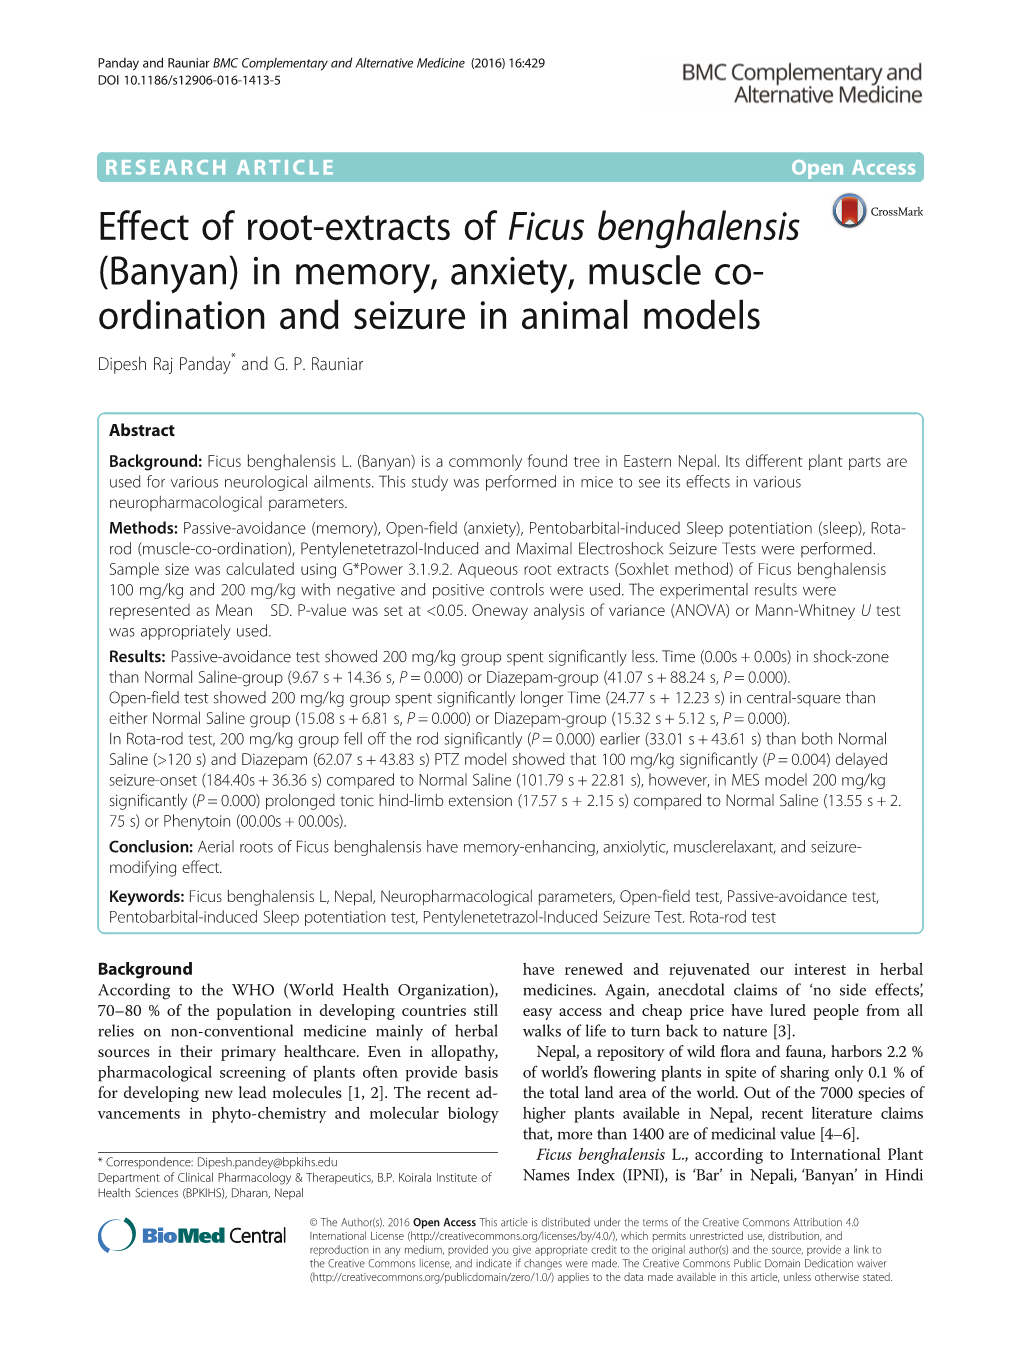 Effect of Root-Extracts of Ficus Benghalensis (Banyan) in Memory, Anxiety, Muscle Co- Ordination and Seizure in Animal Models Dipesh Raj Panday* and G